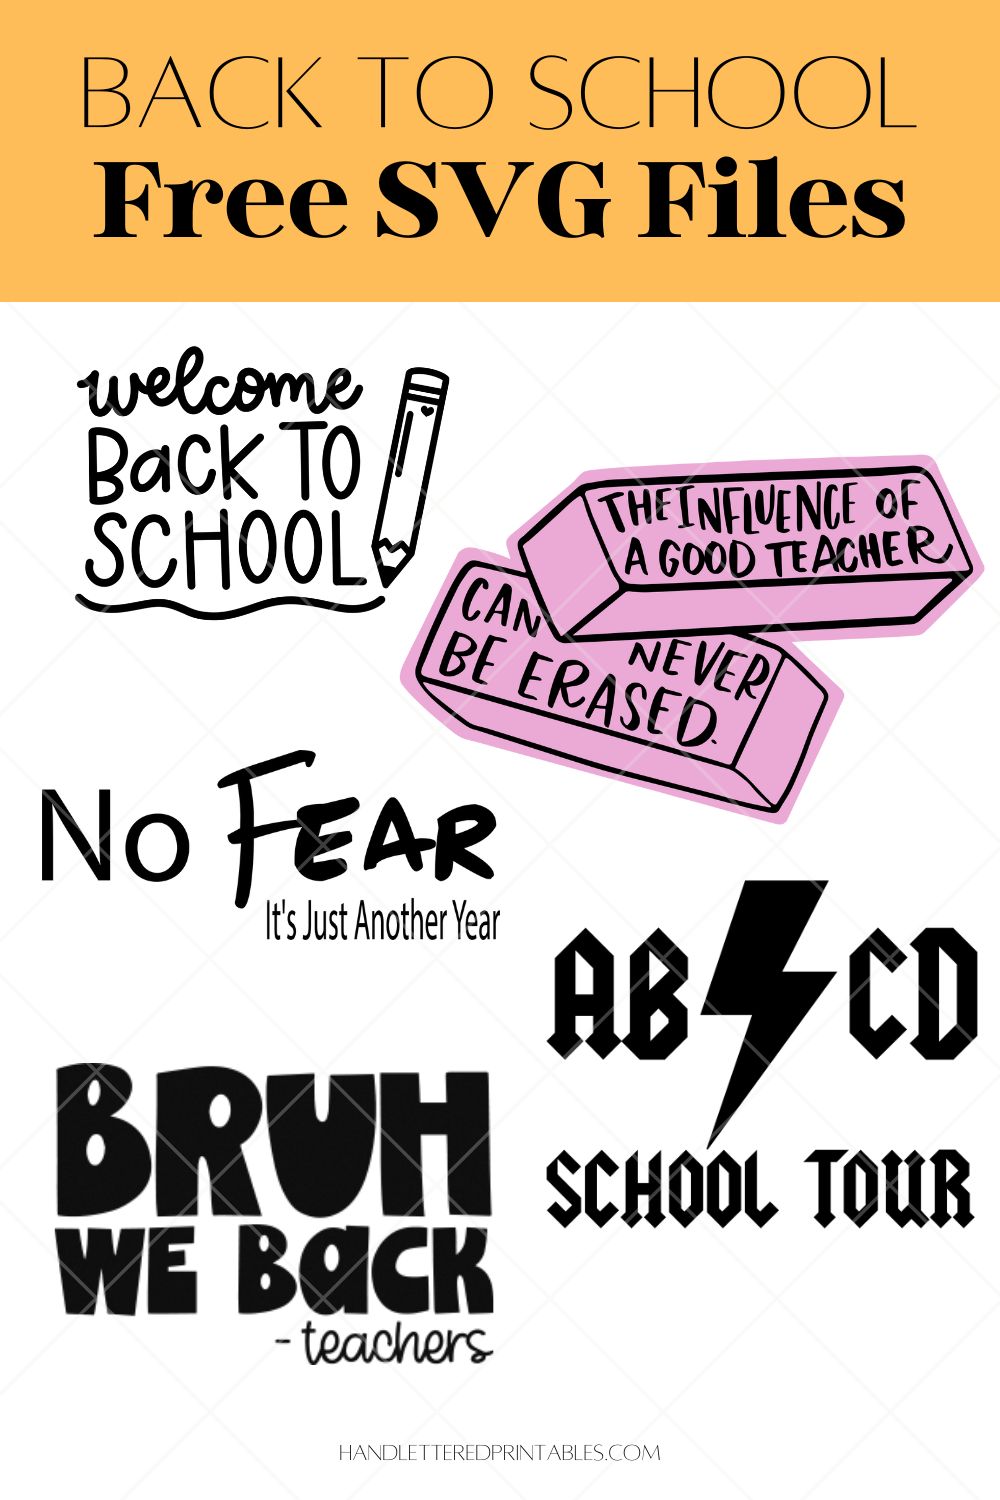 Image is a collage of text and illustration based SVG files with a back to school theme, text title reads: back to school Free SVG Files